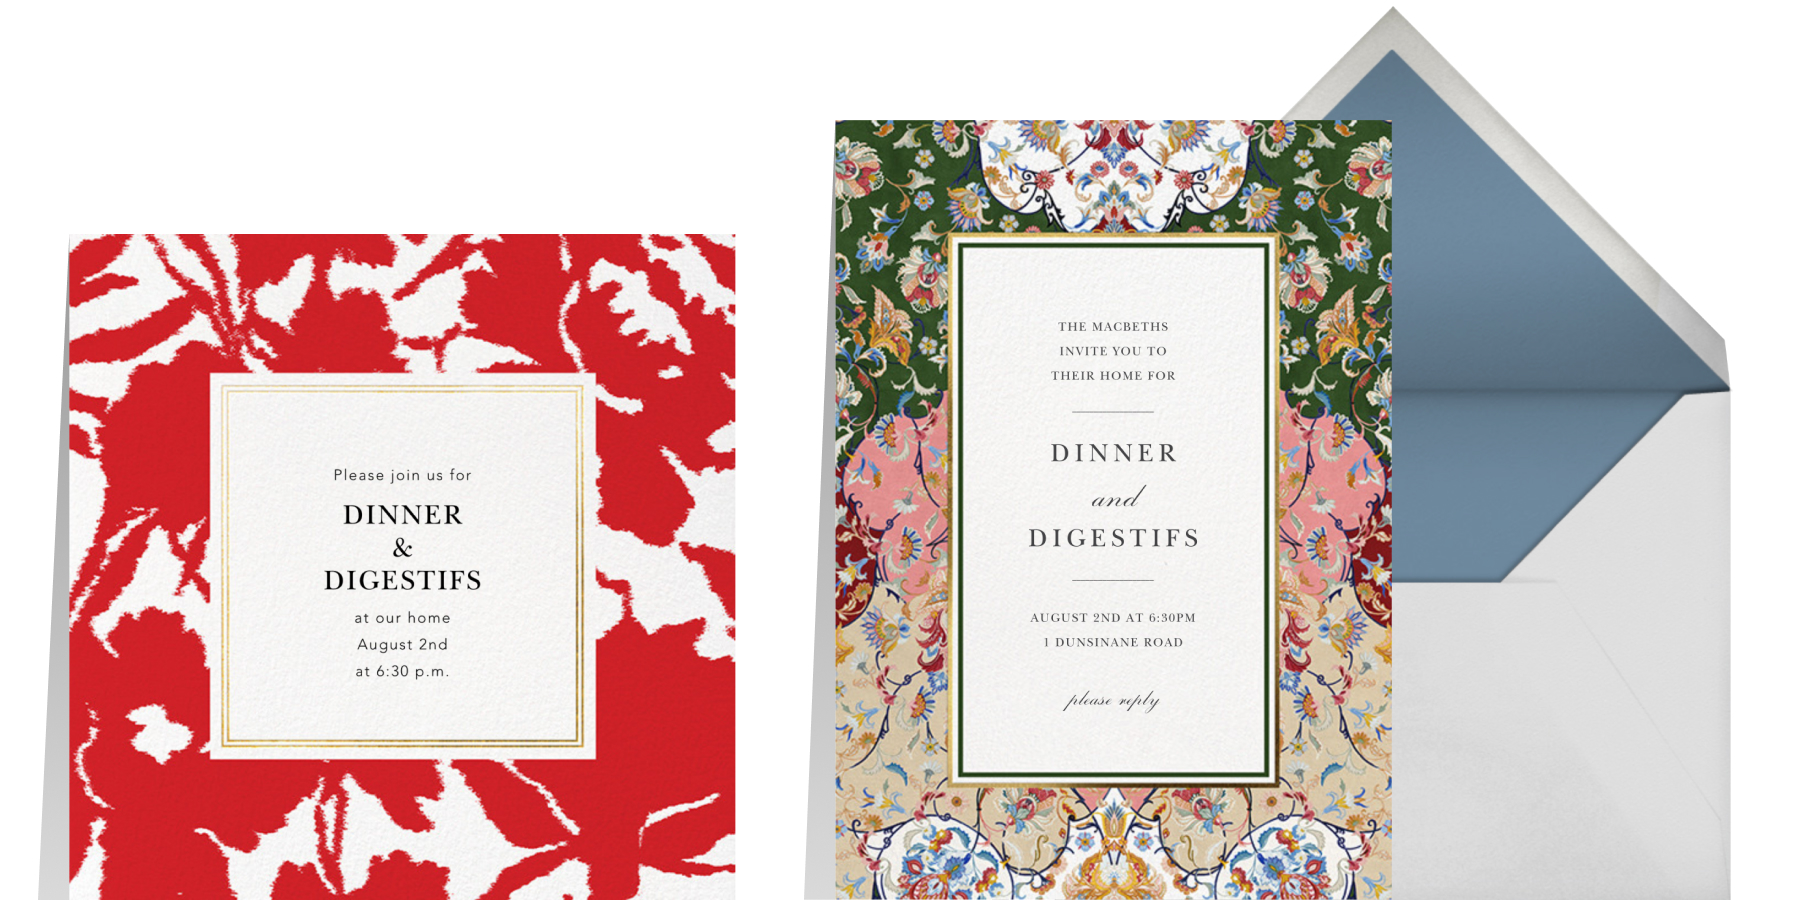 Two general party invitations side by side. The left is a red and white floral and the right is a green, pink, and tan floral invitation